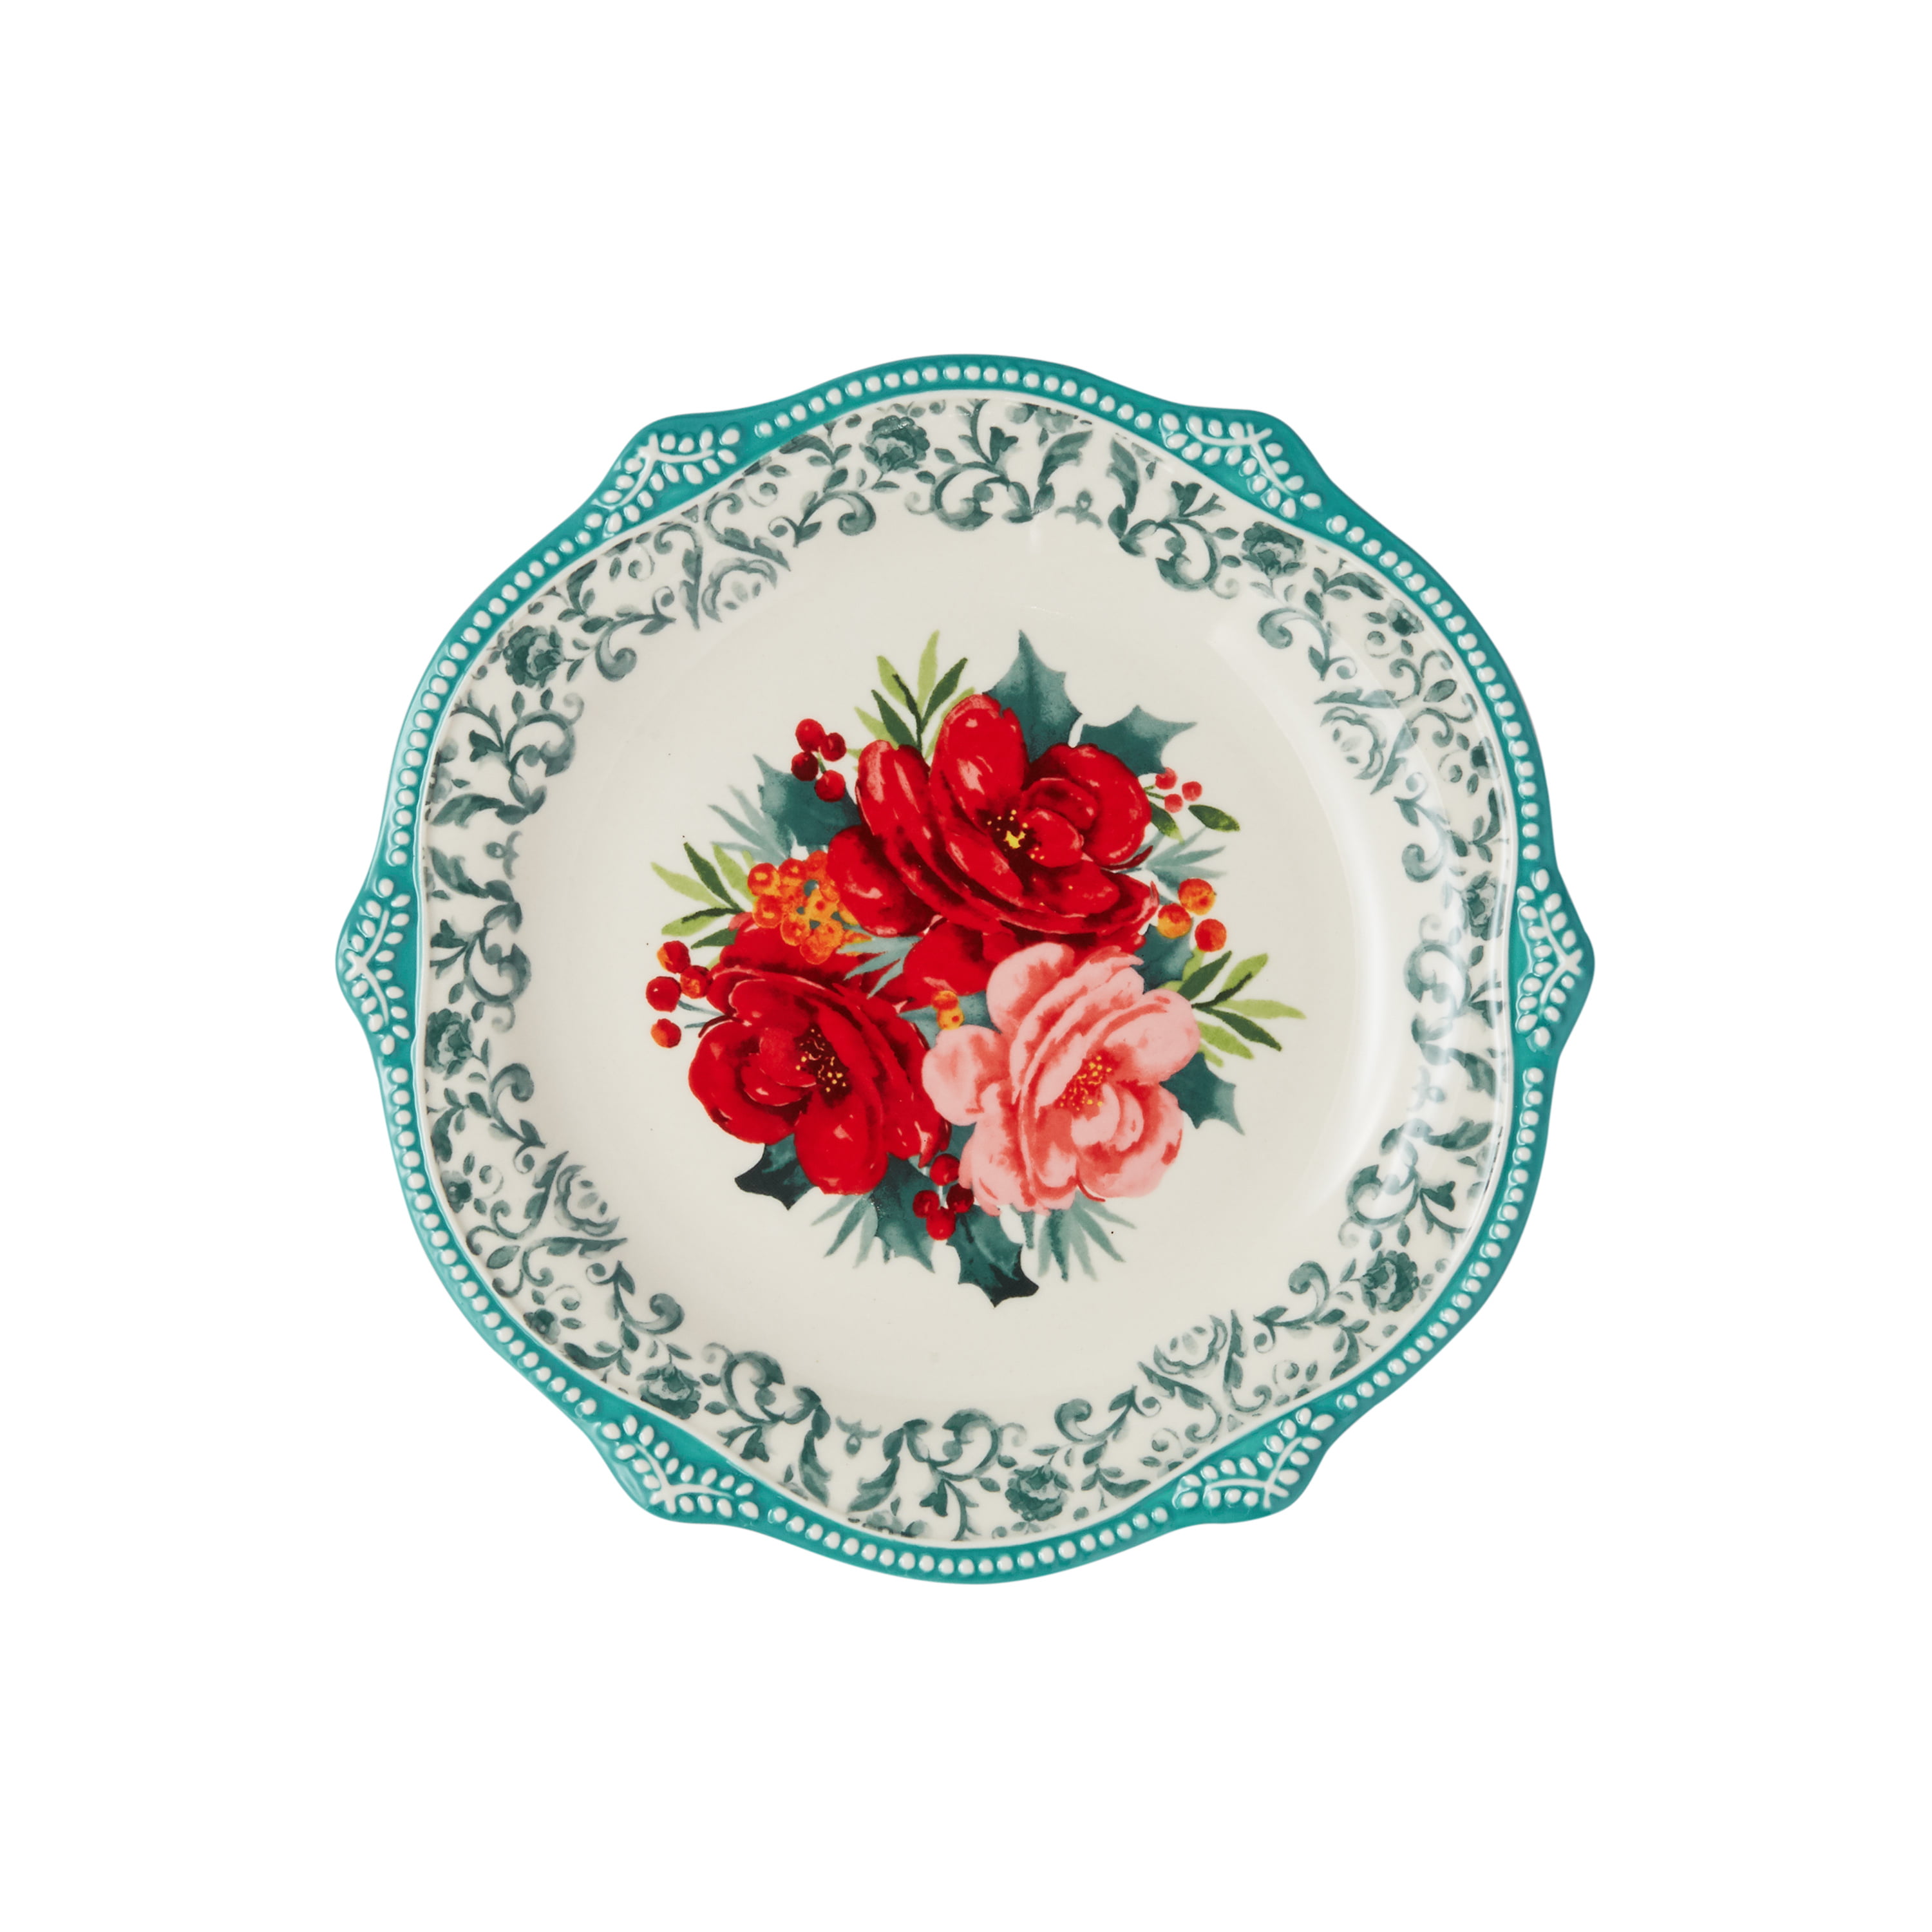 The Pioneer Woman Mercantile - Strawberry plates (and pot holders